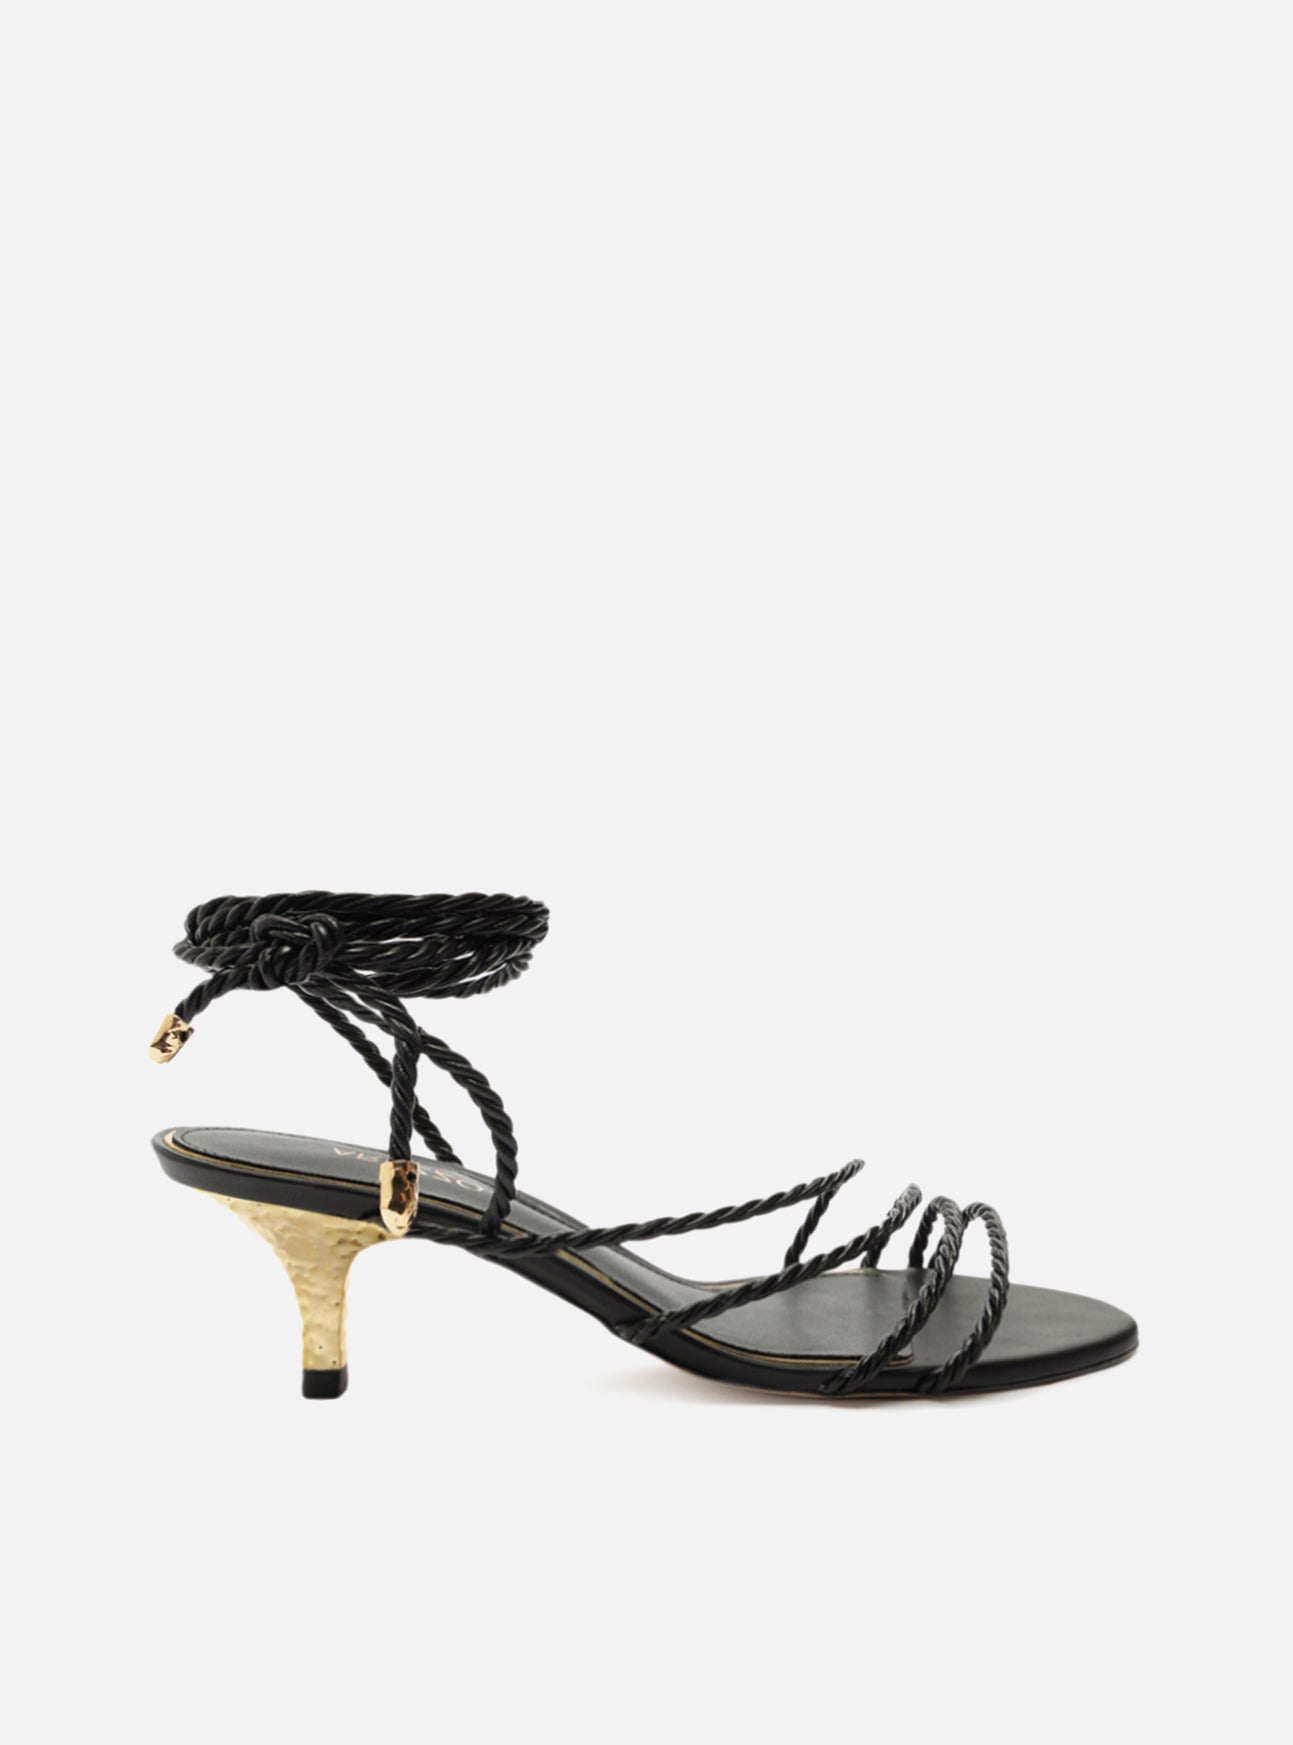 Black leather sandal, with twisted straps, low stiletto heel in hammered gold metal and round toe. Closure with metal tip.